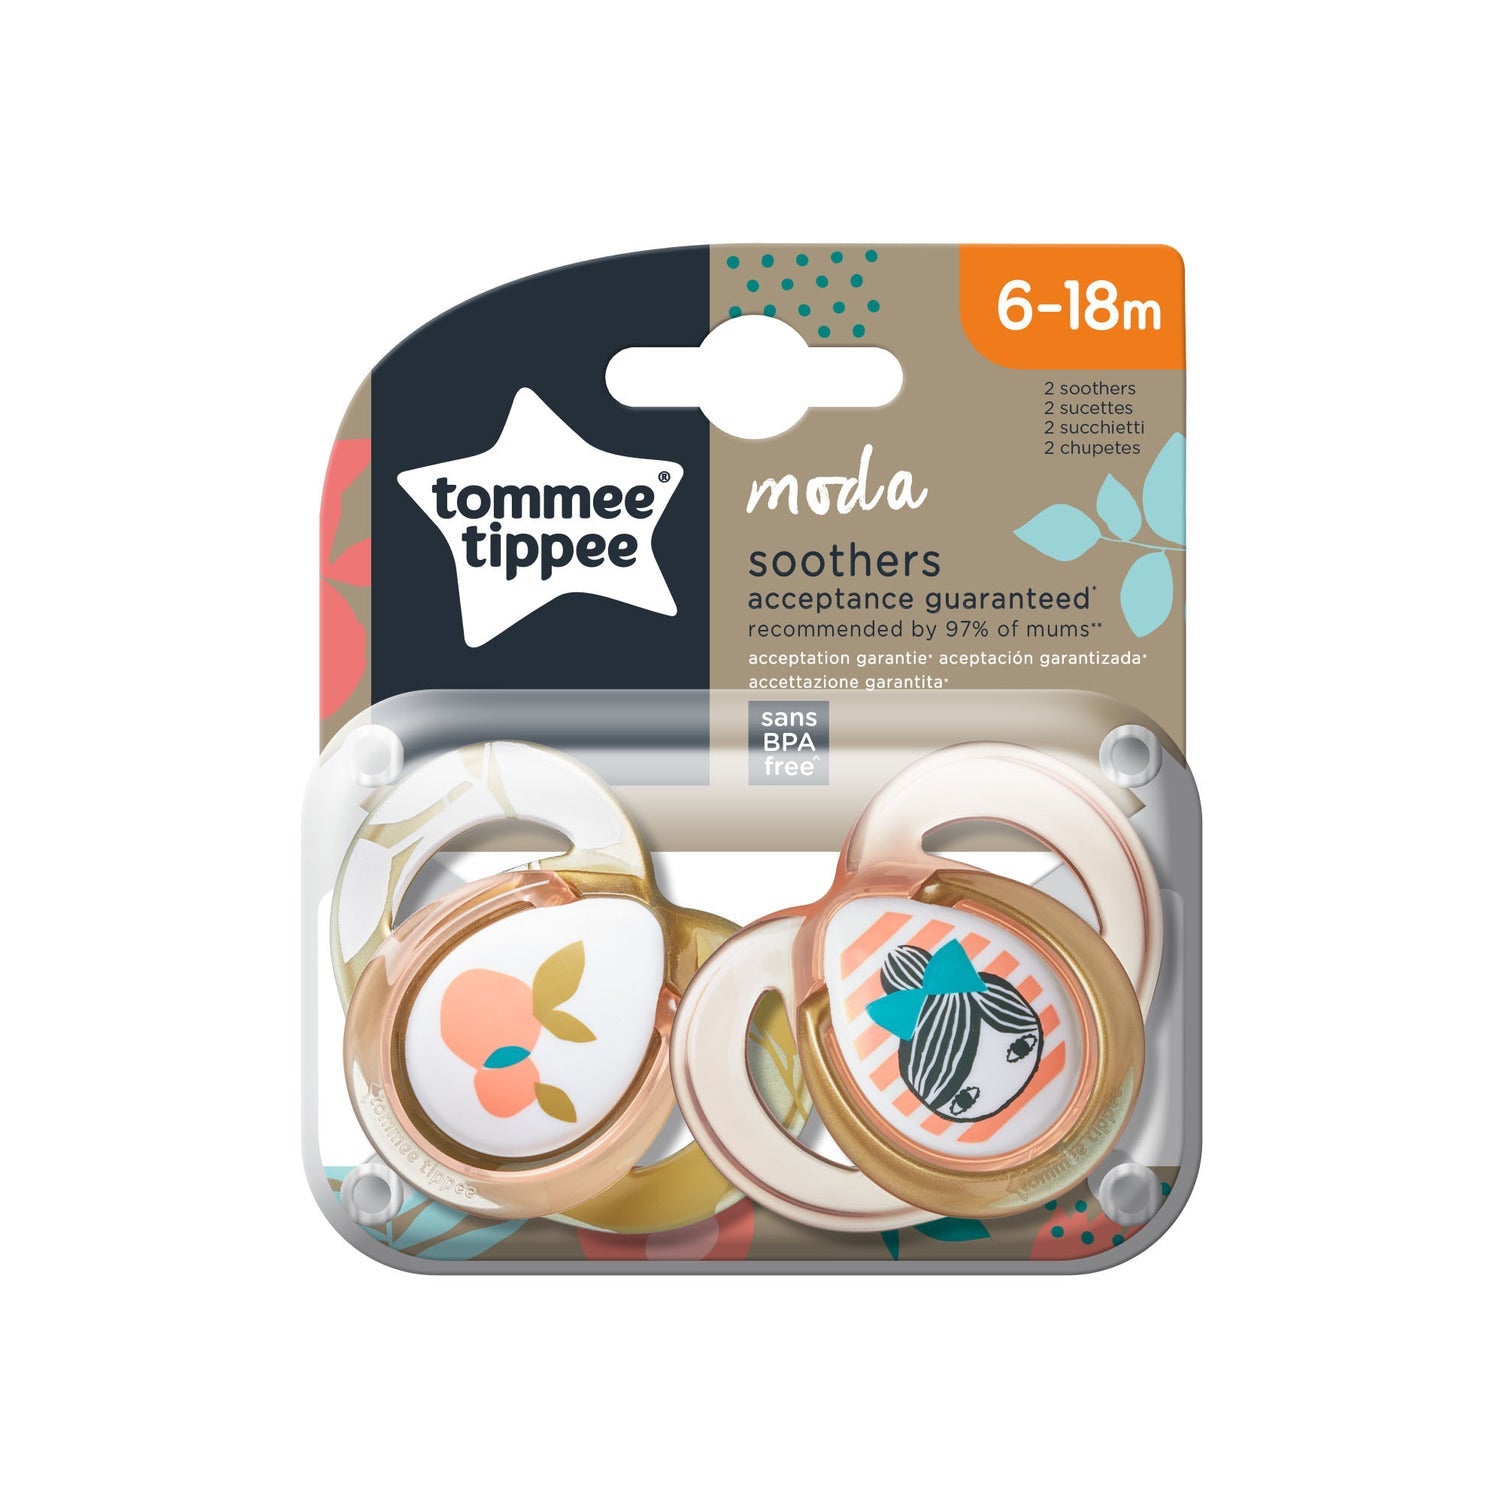 Tommee Tippee Moda baby/boy soother/dummy 0-6m Blue